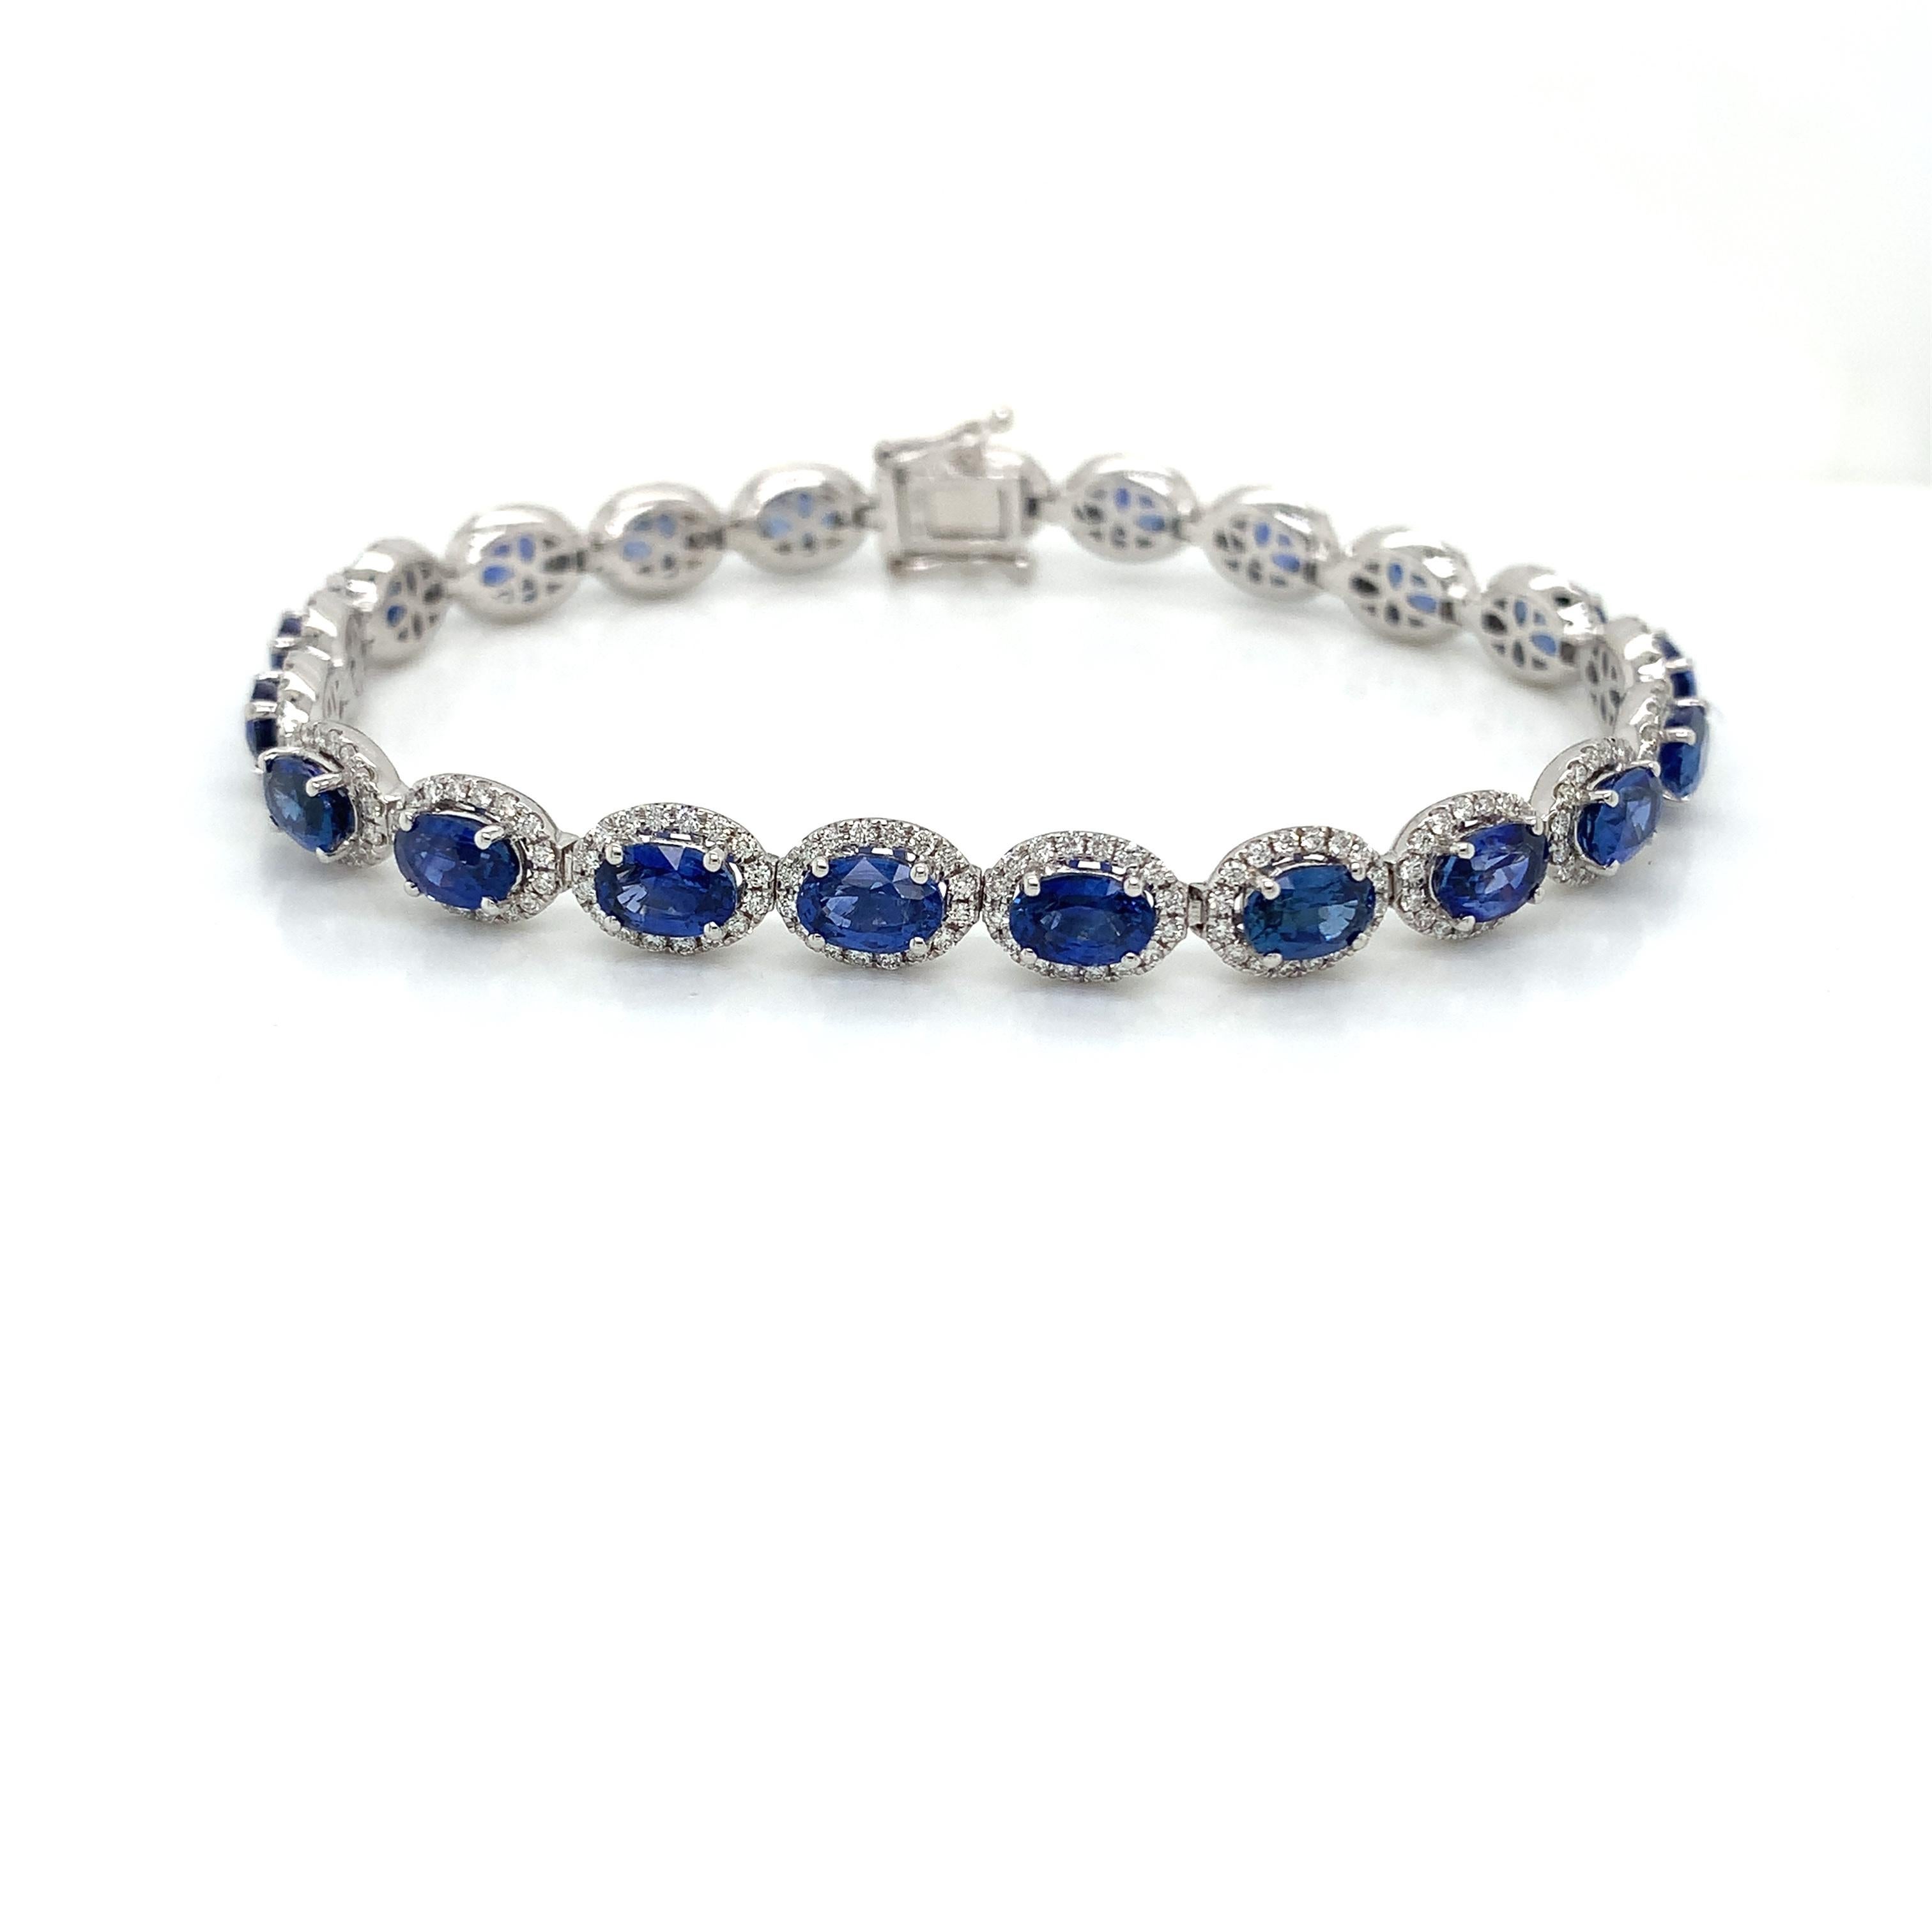 21 pieces of sapphires weighing 13.25 cts 
Measuring (6.0x4.0) mm
21 pieces of Diamonds weighing .64 cts
Set in 14k white gold bracelet
Bracelet is 7 inches